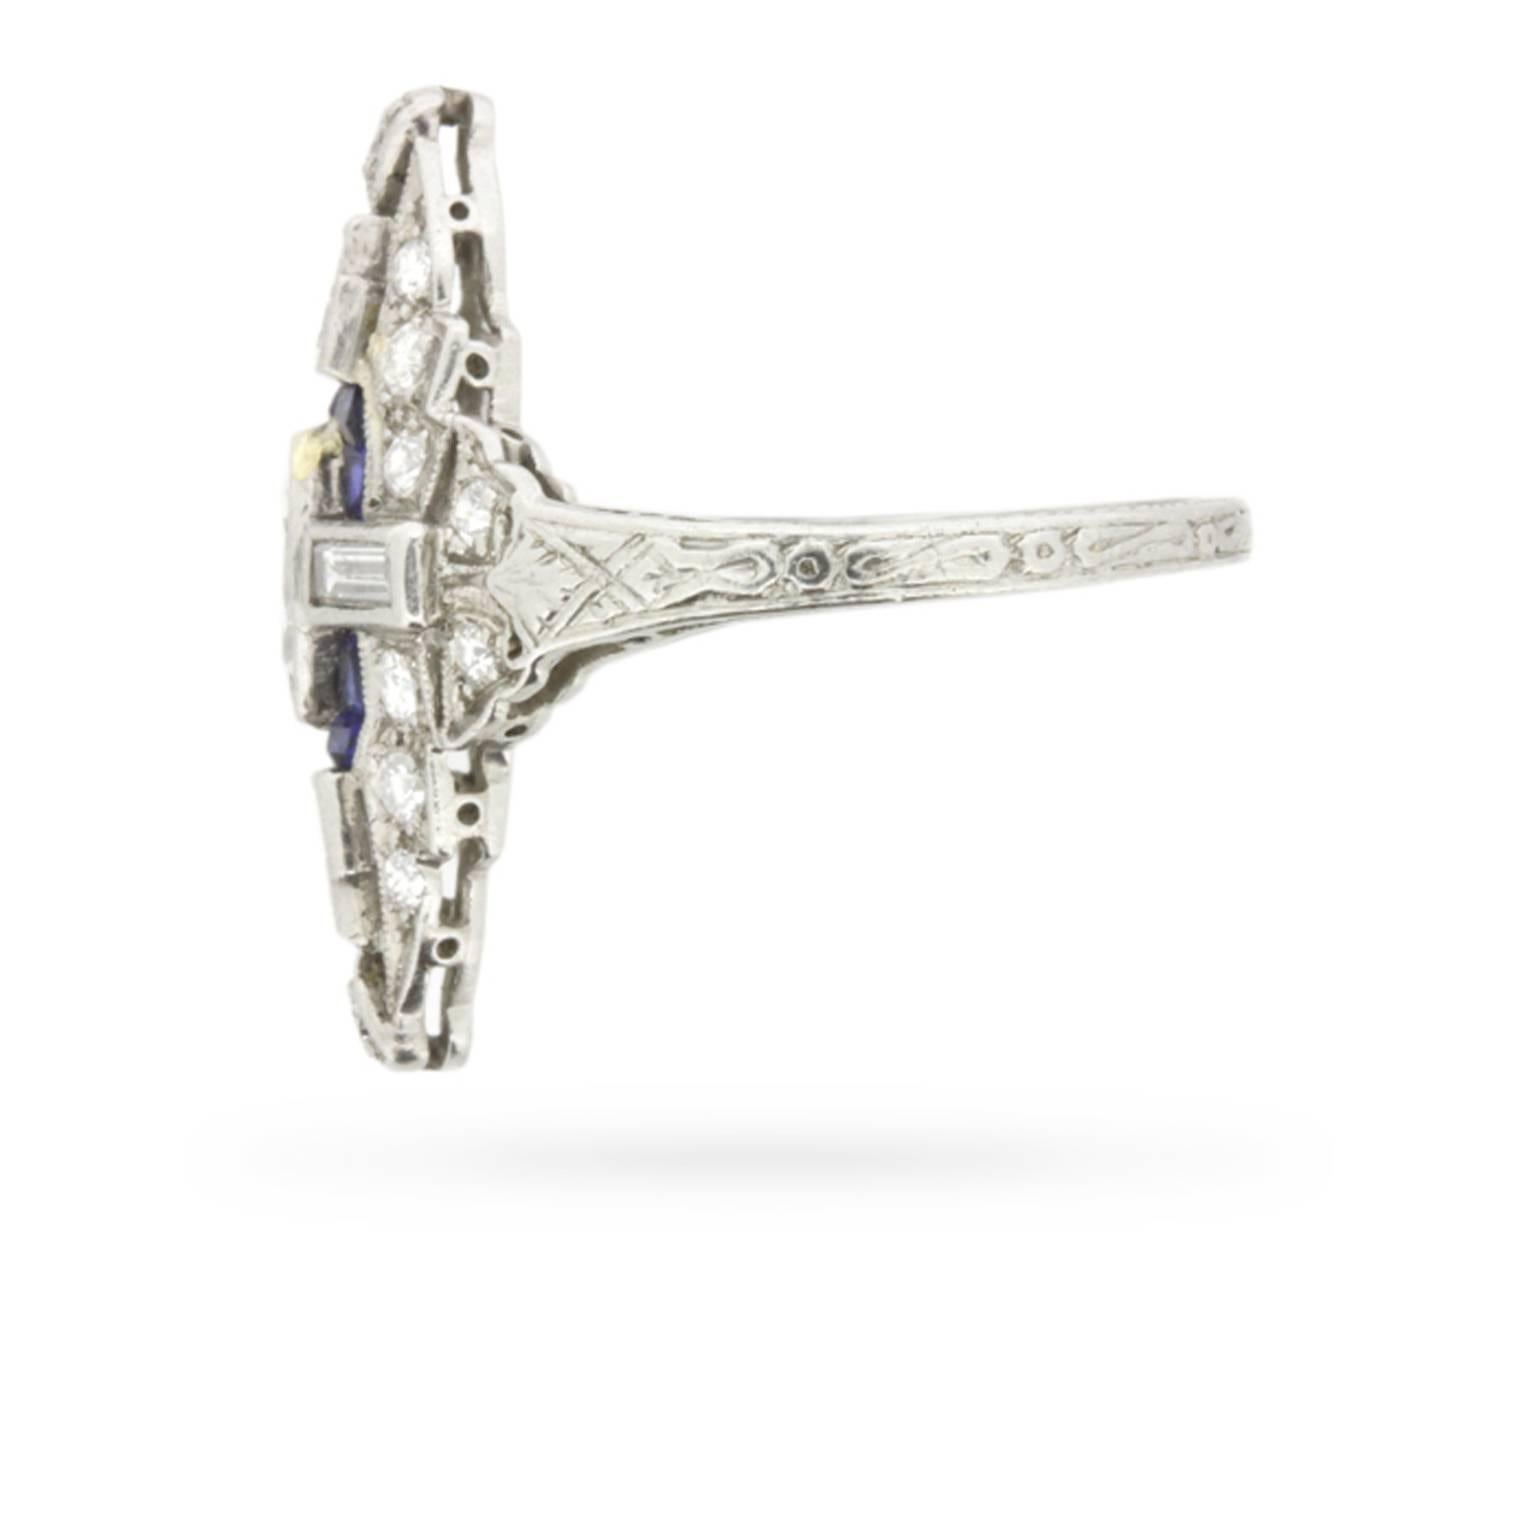 An exquisite Art Deco dinner ring in the era’s most preferred combination of diamonds and sapphires!

Handmade in platinum at the height of the Jazz Age, this sophisticated ring centres one marquise cut diamond within in a pool of sapphires, inside